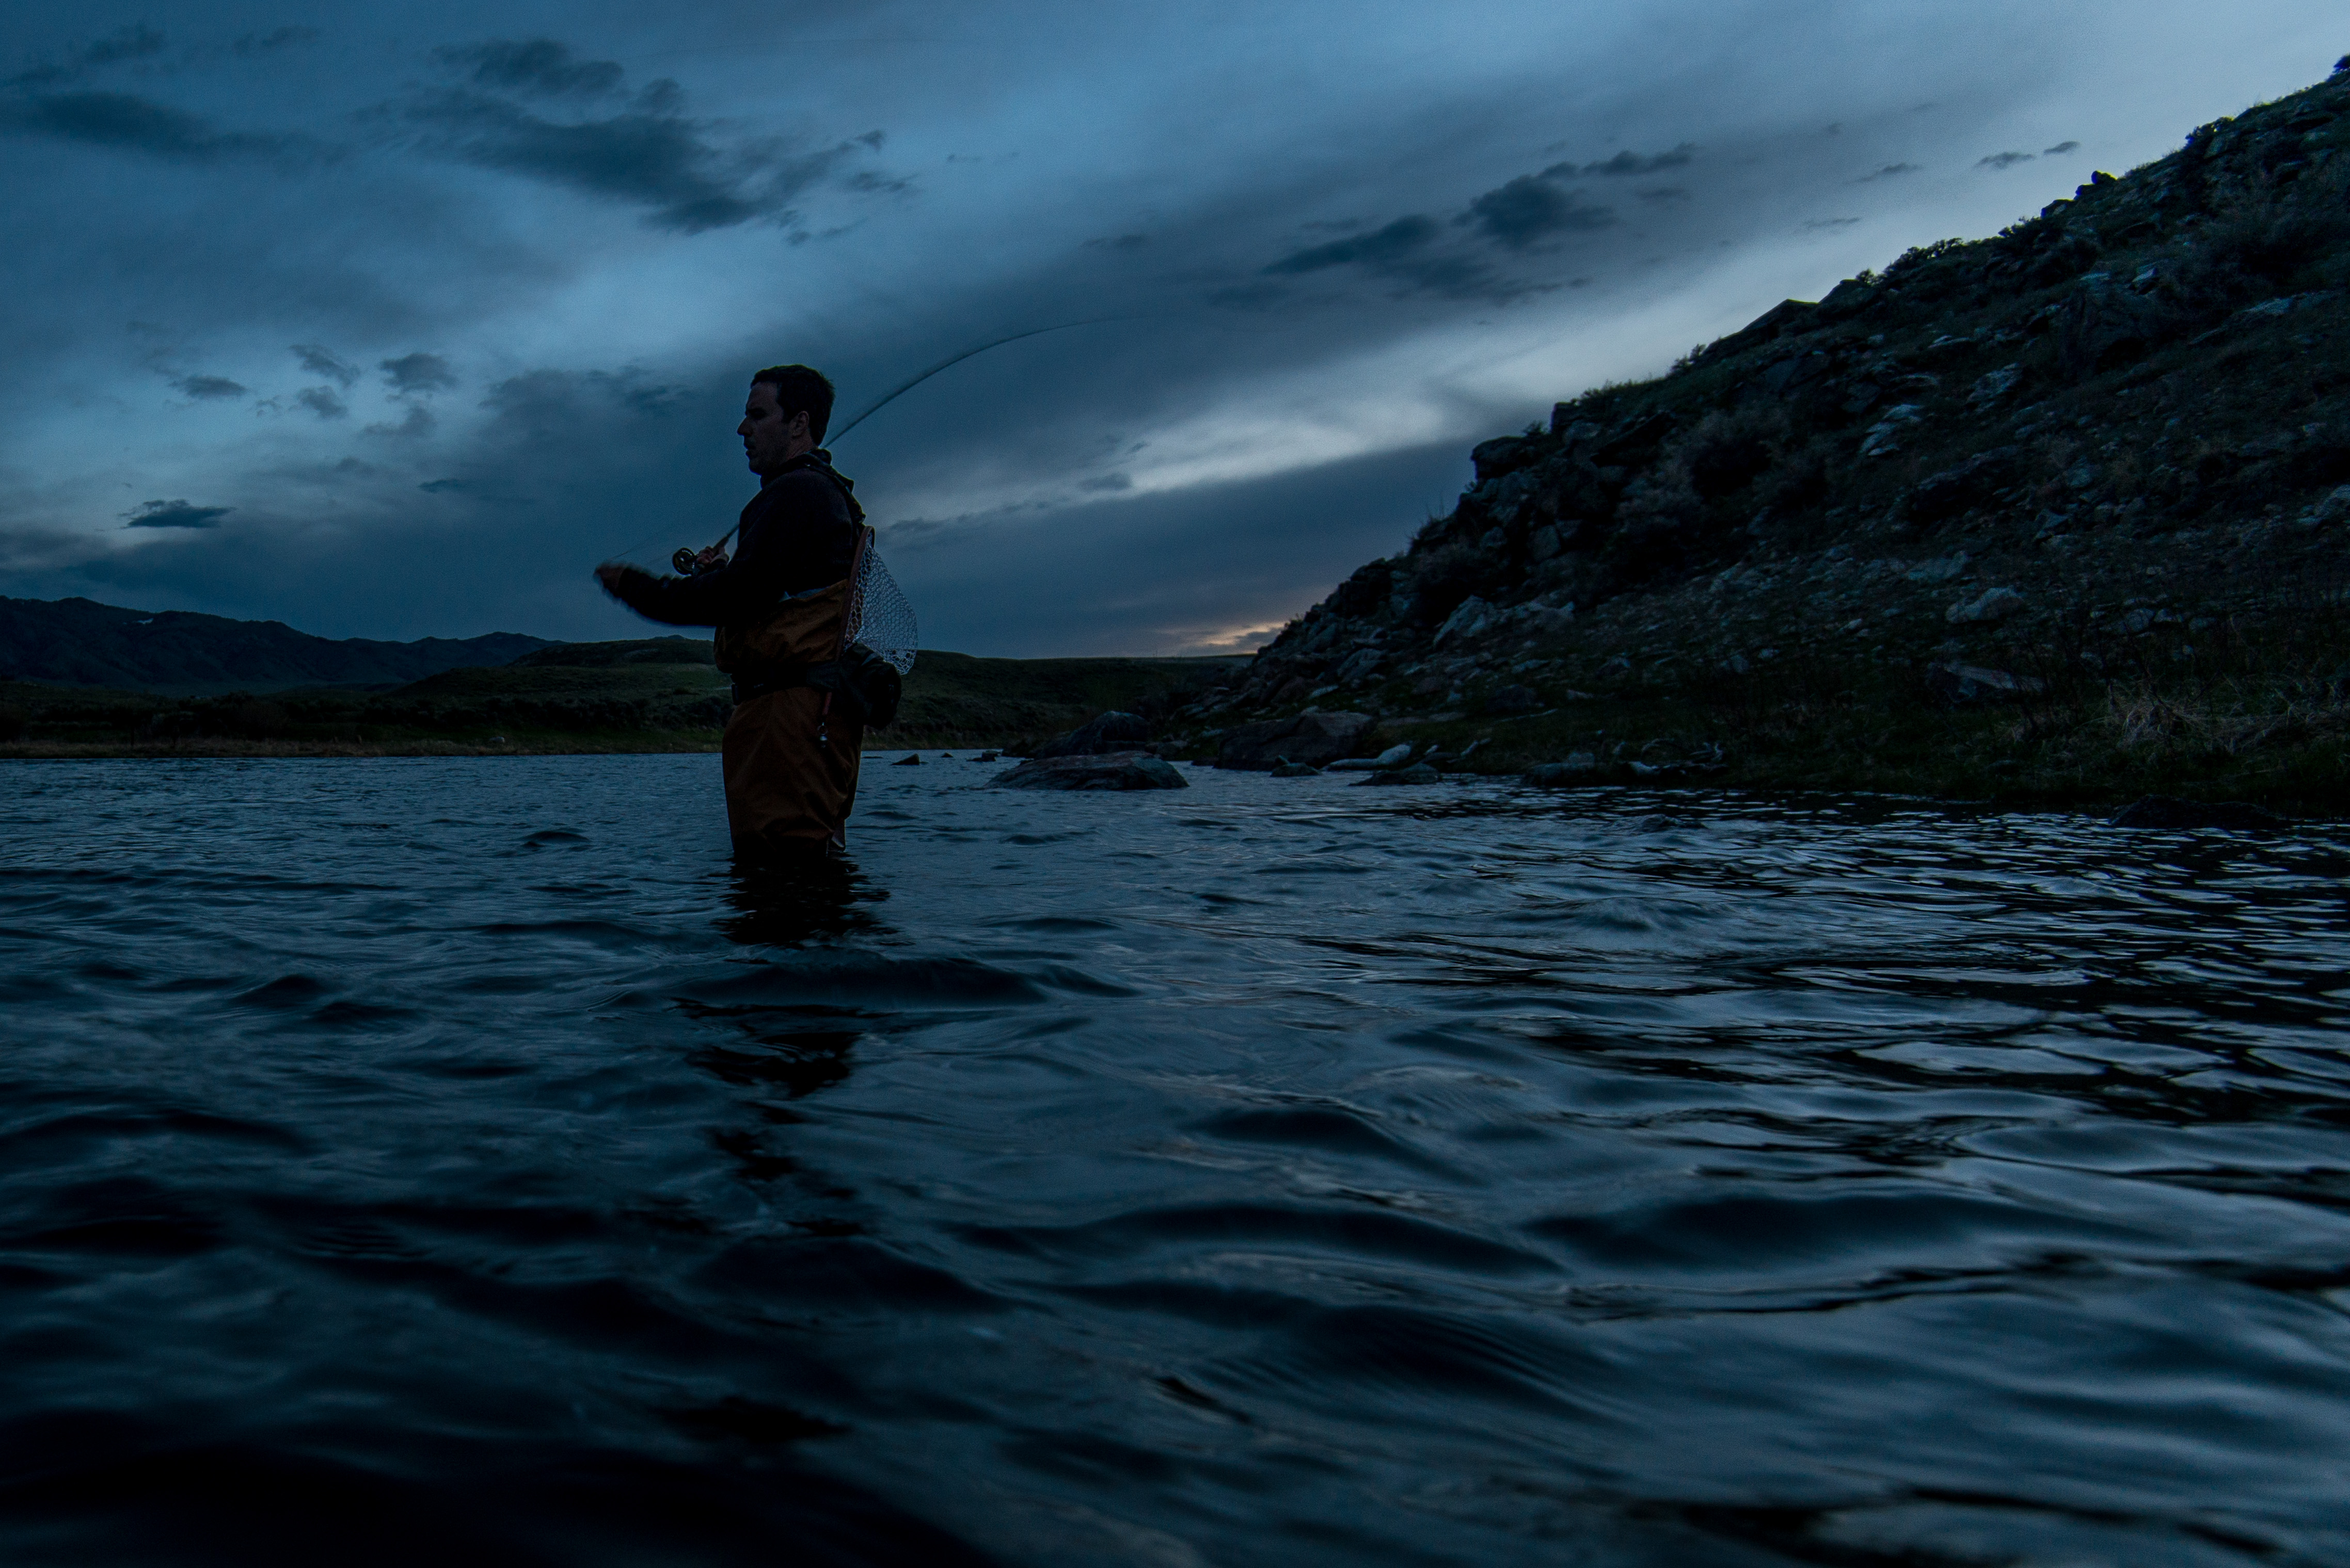 16-35 f4, here's an example of shooting wide to capture the angler and surrounding scene. Photos by Steven Brutger